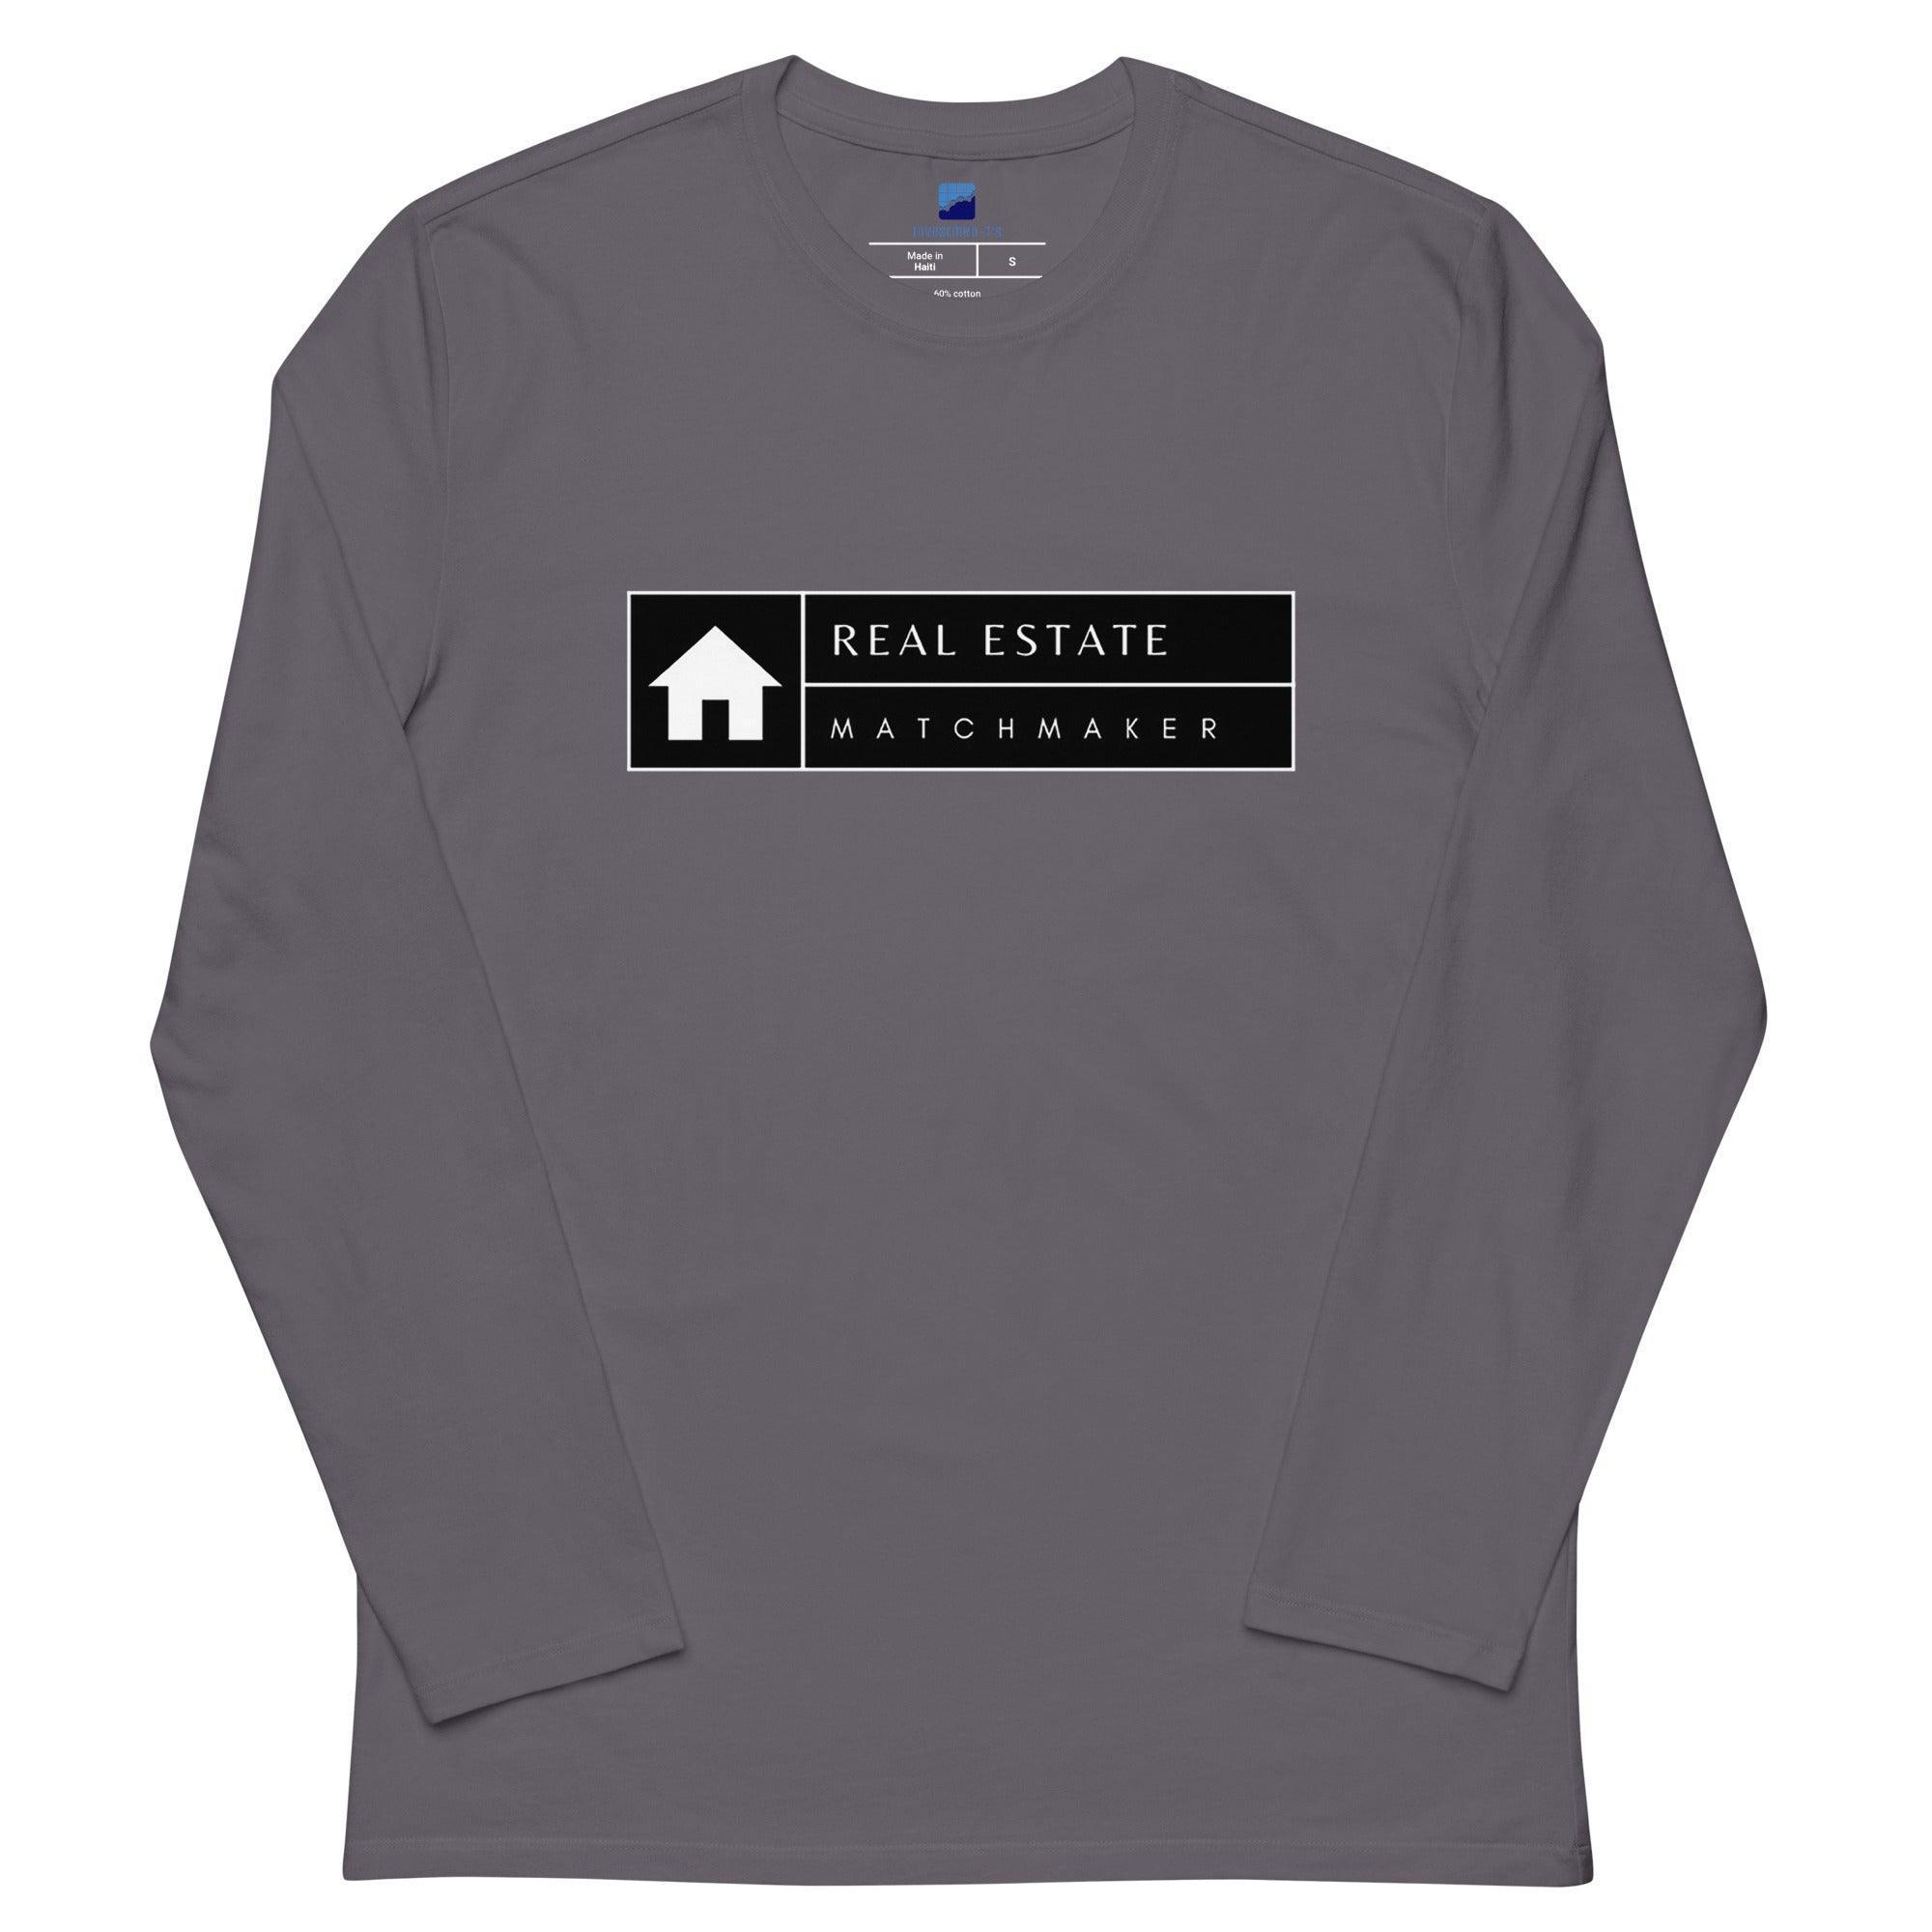 Real Estate Matchmaker Long Sleeve T-Shirt - InvestmenTees